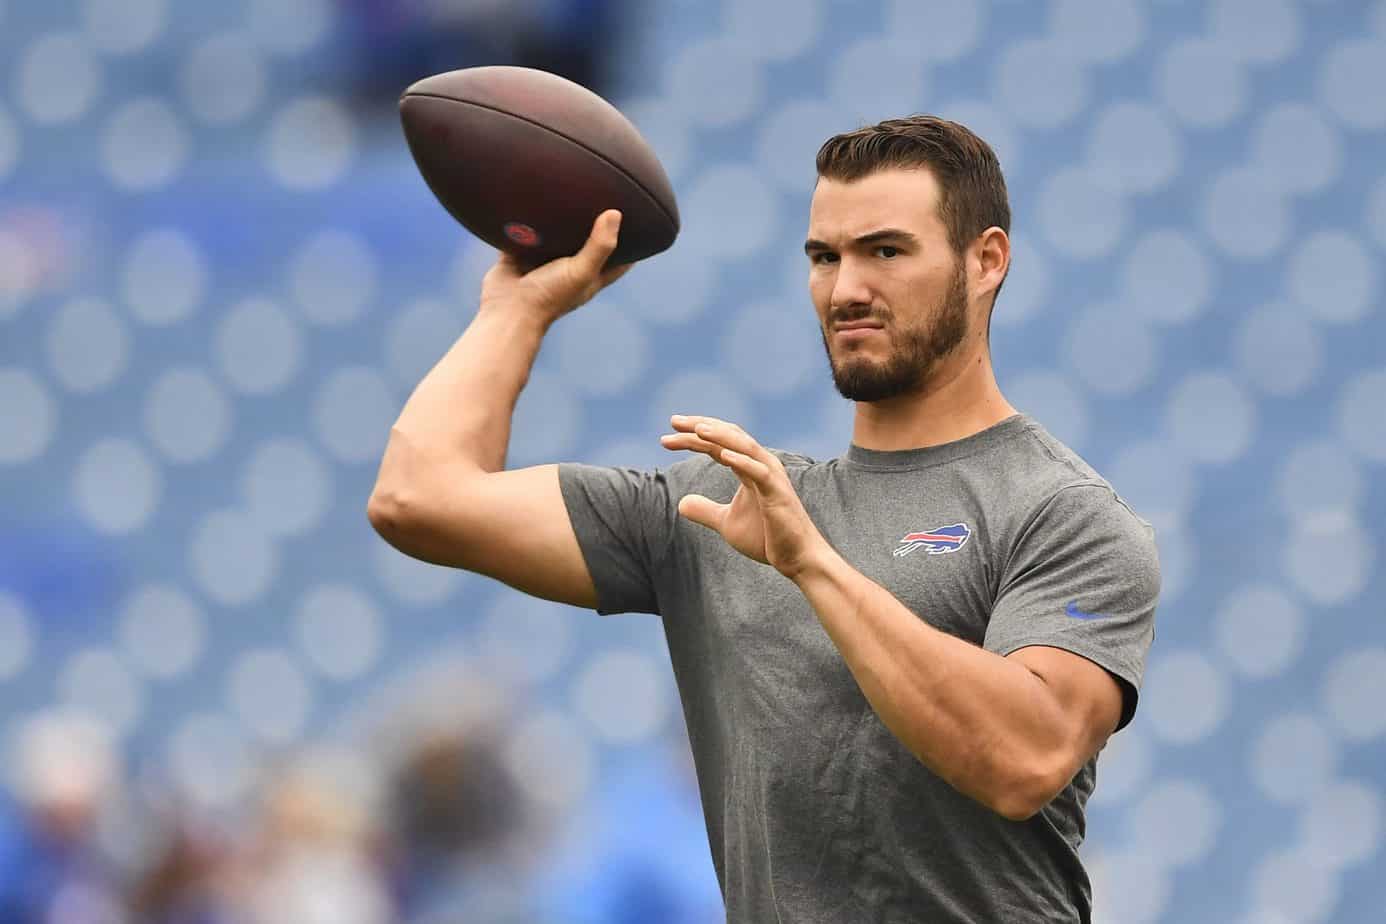 Mitchell Trubiksy's wife, Hillary Trubisky, took to Instagram to announce that she's pregnant with the couple's first child after they tied the knot in the offseason